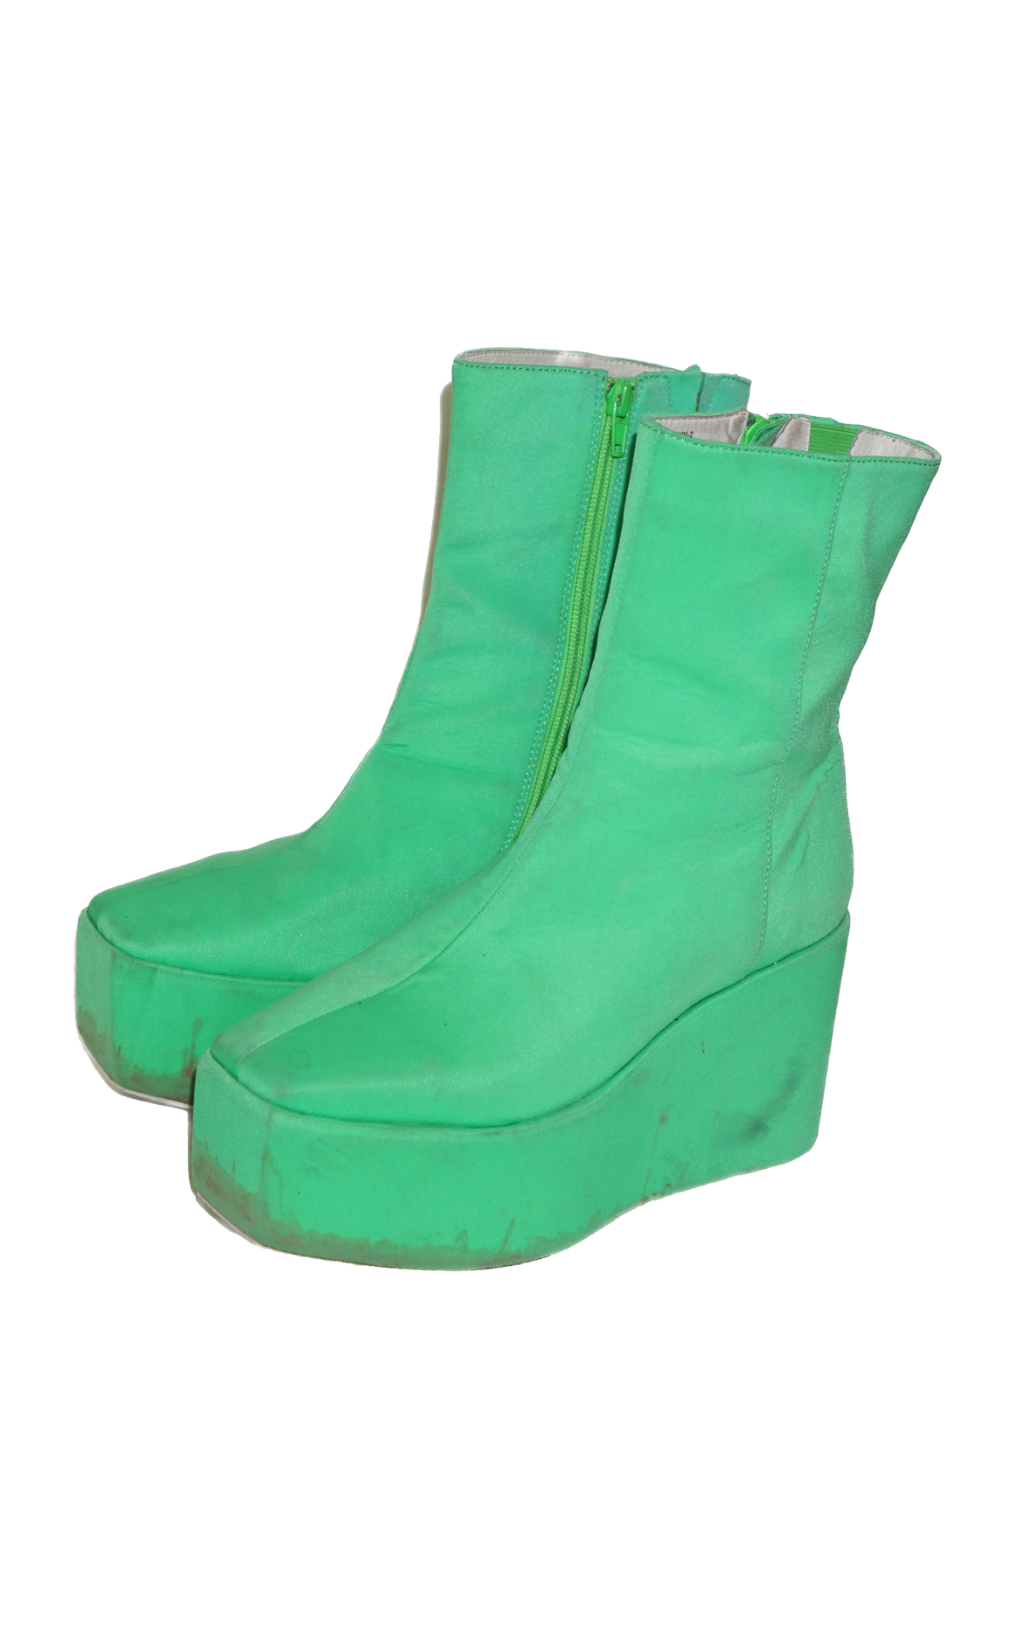 JEFFREY CAMPBELL Neon Green Wedge Boots resellum